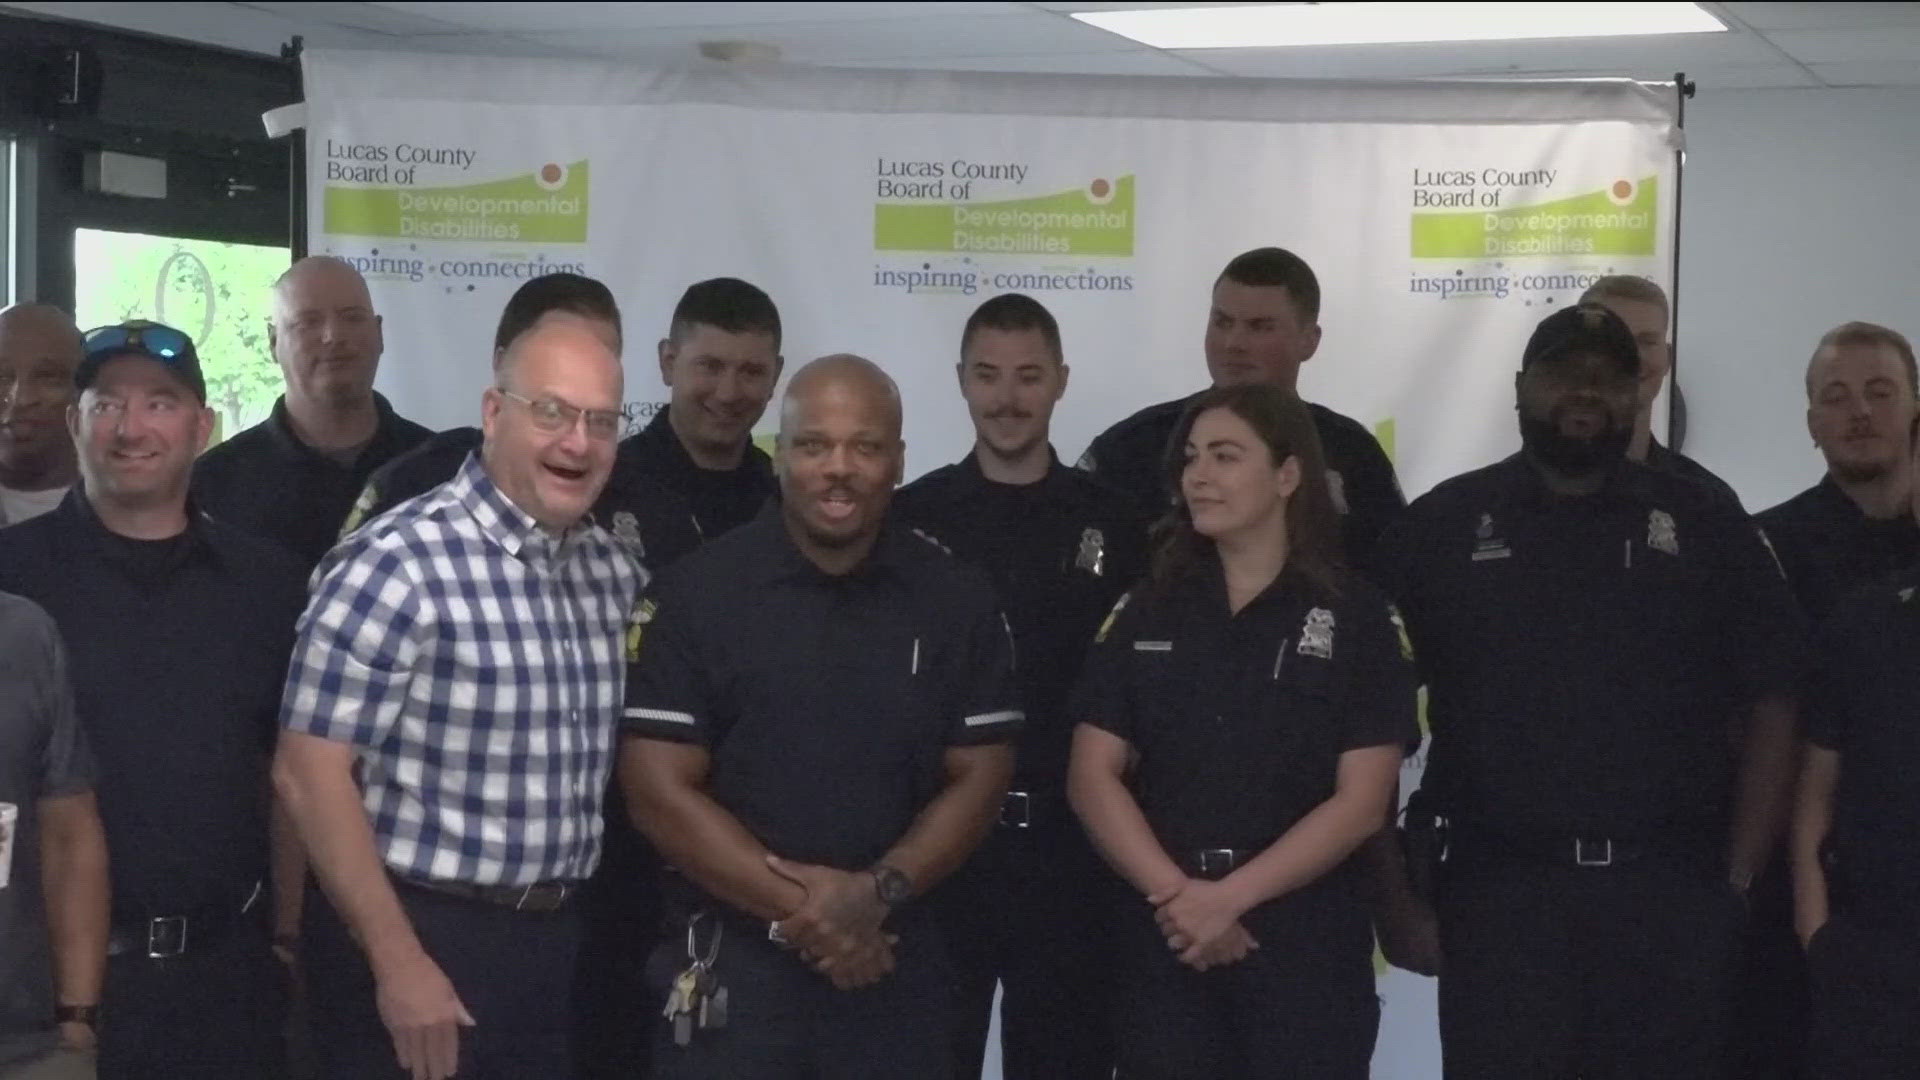 The Lucas County Board of Developmental Disabilities worked with the Ohio Association of County Board Development Disabilities to train law enforcement.